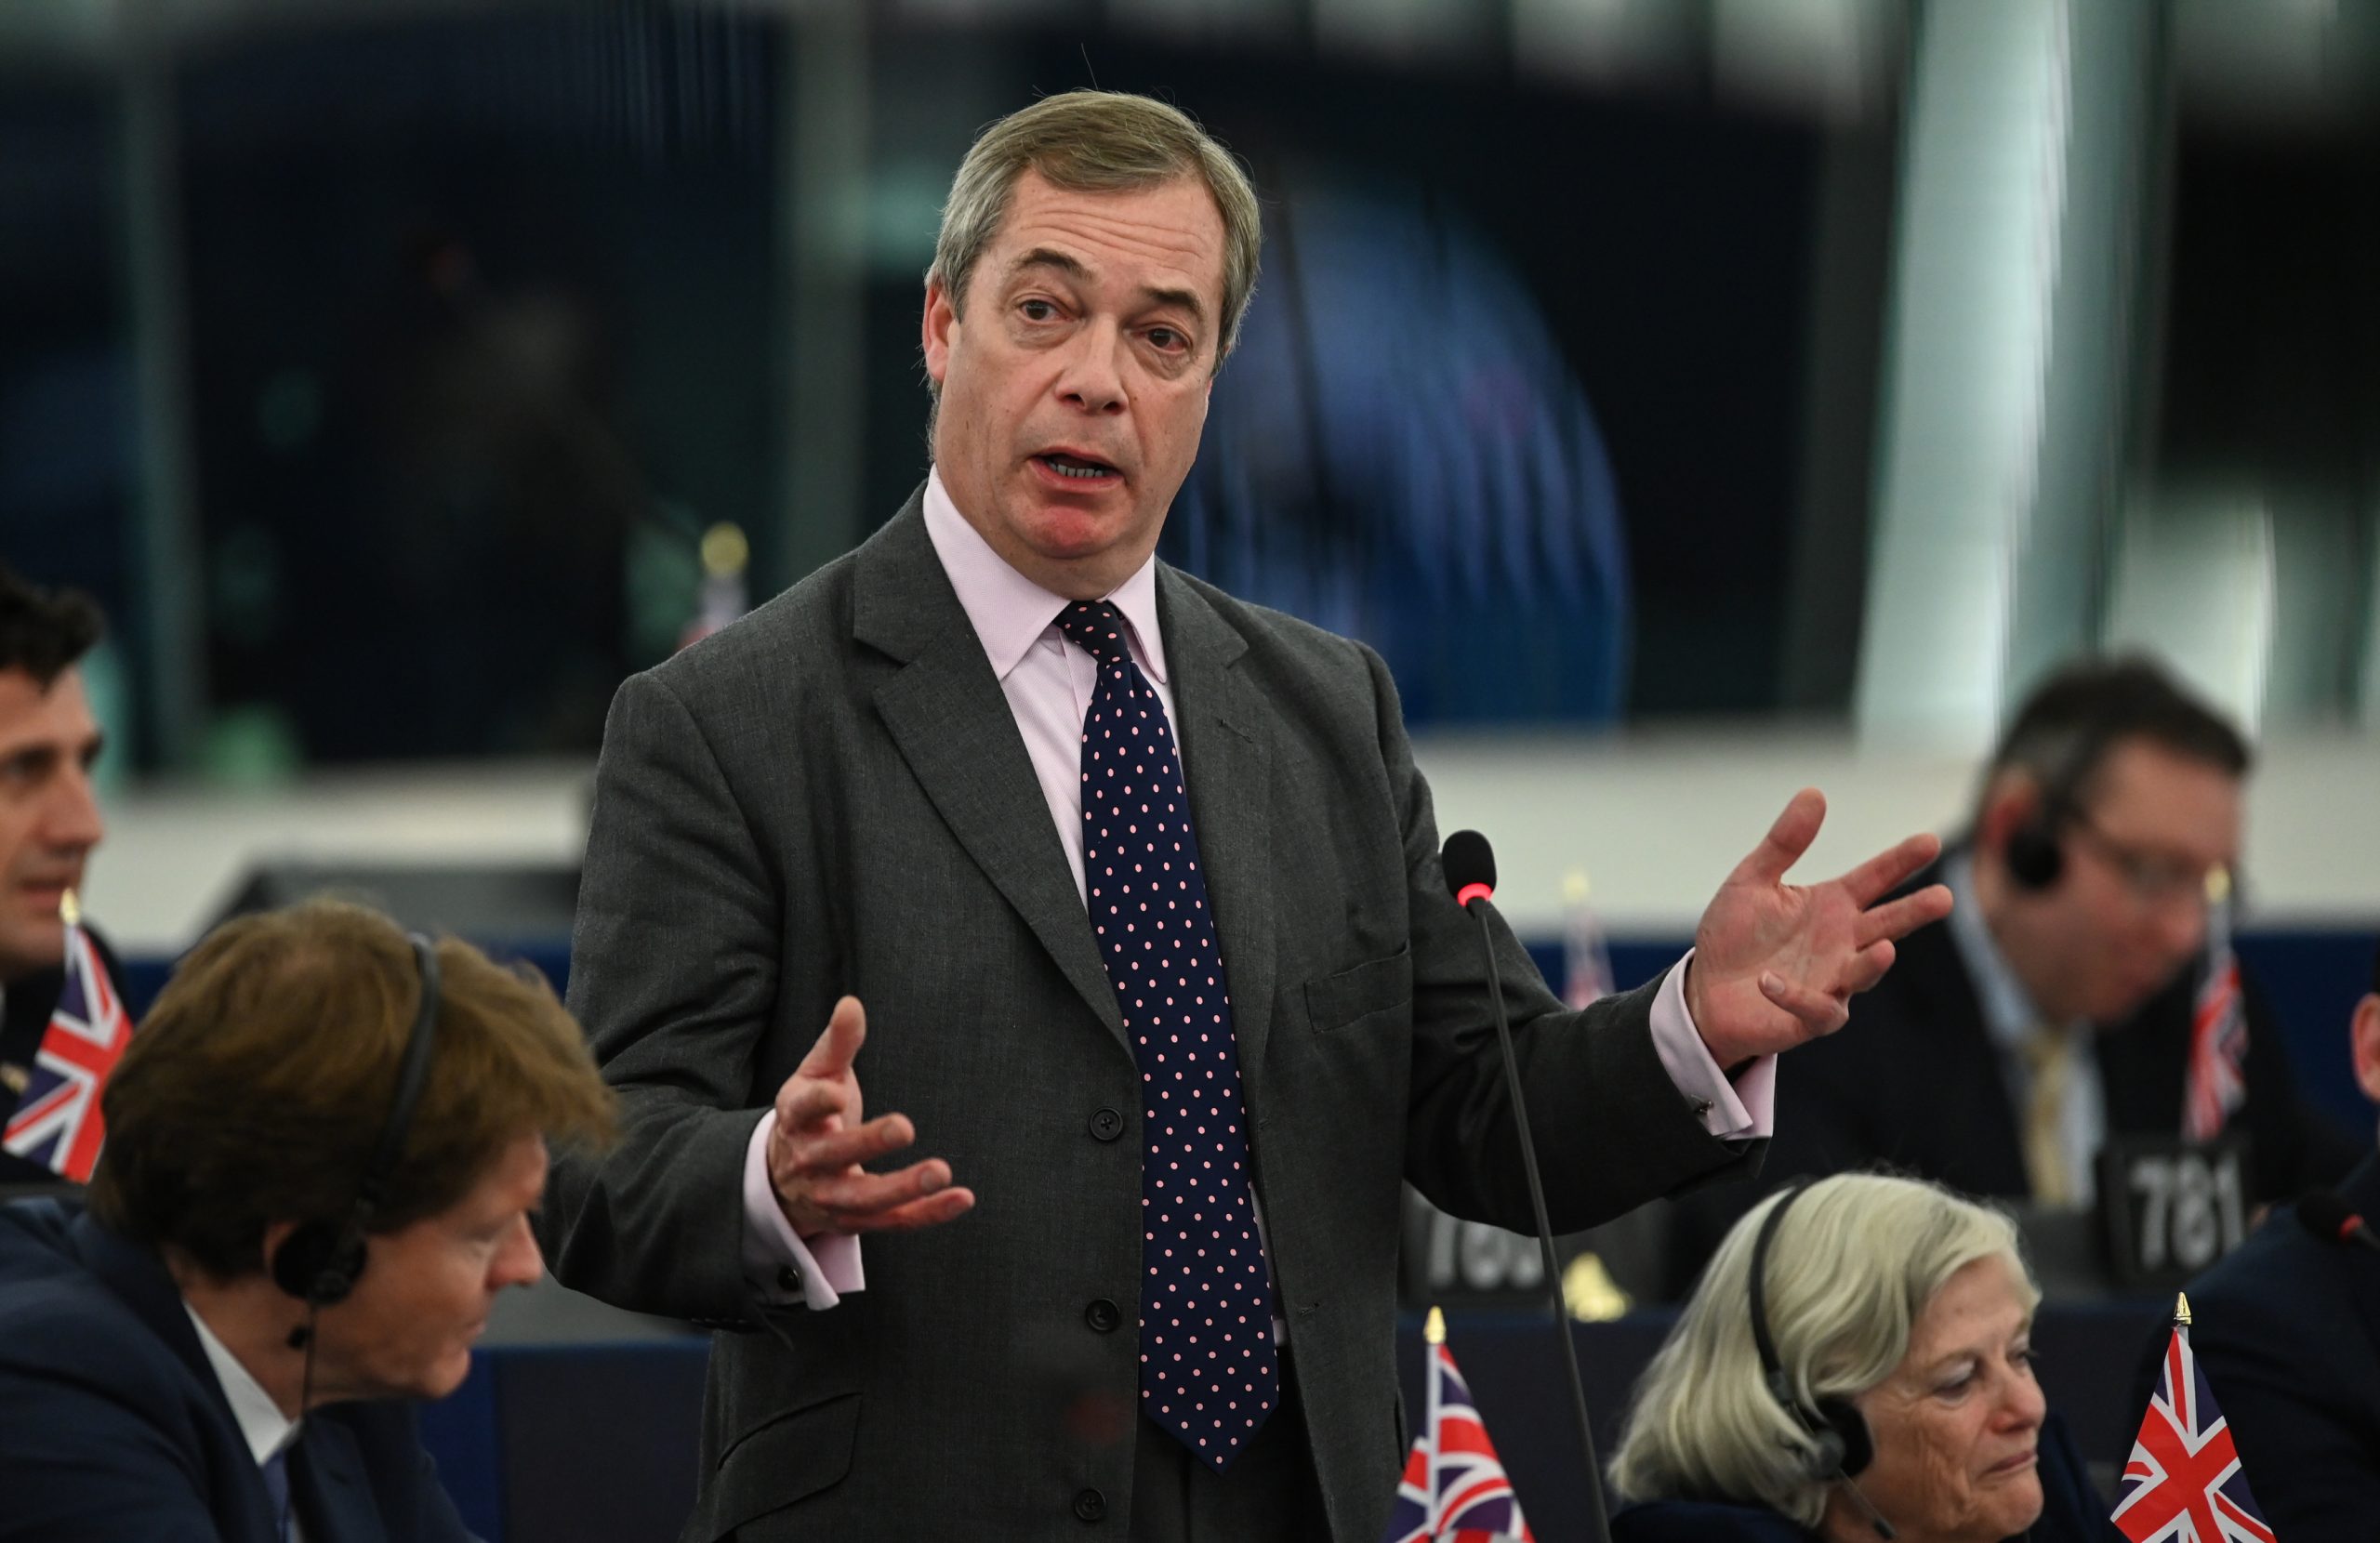 epa08078930 Nigel Farage from the Brexit Party delivers his speech during a debate at the European Parliament in Strasbourg, France, 18 December 2019.  EPA/PATRICK SEEGER